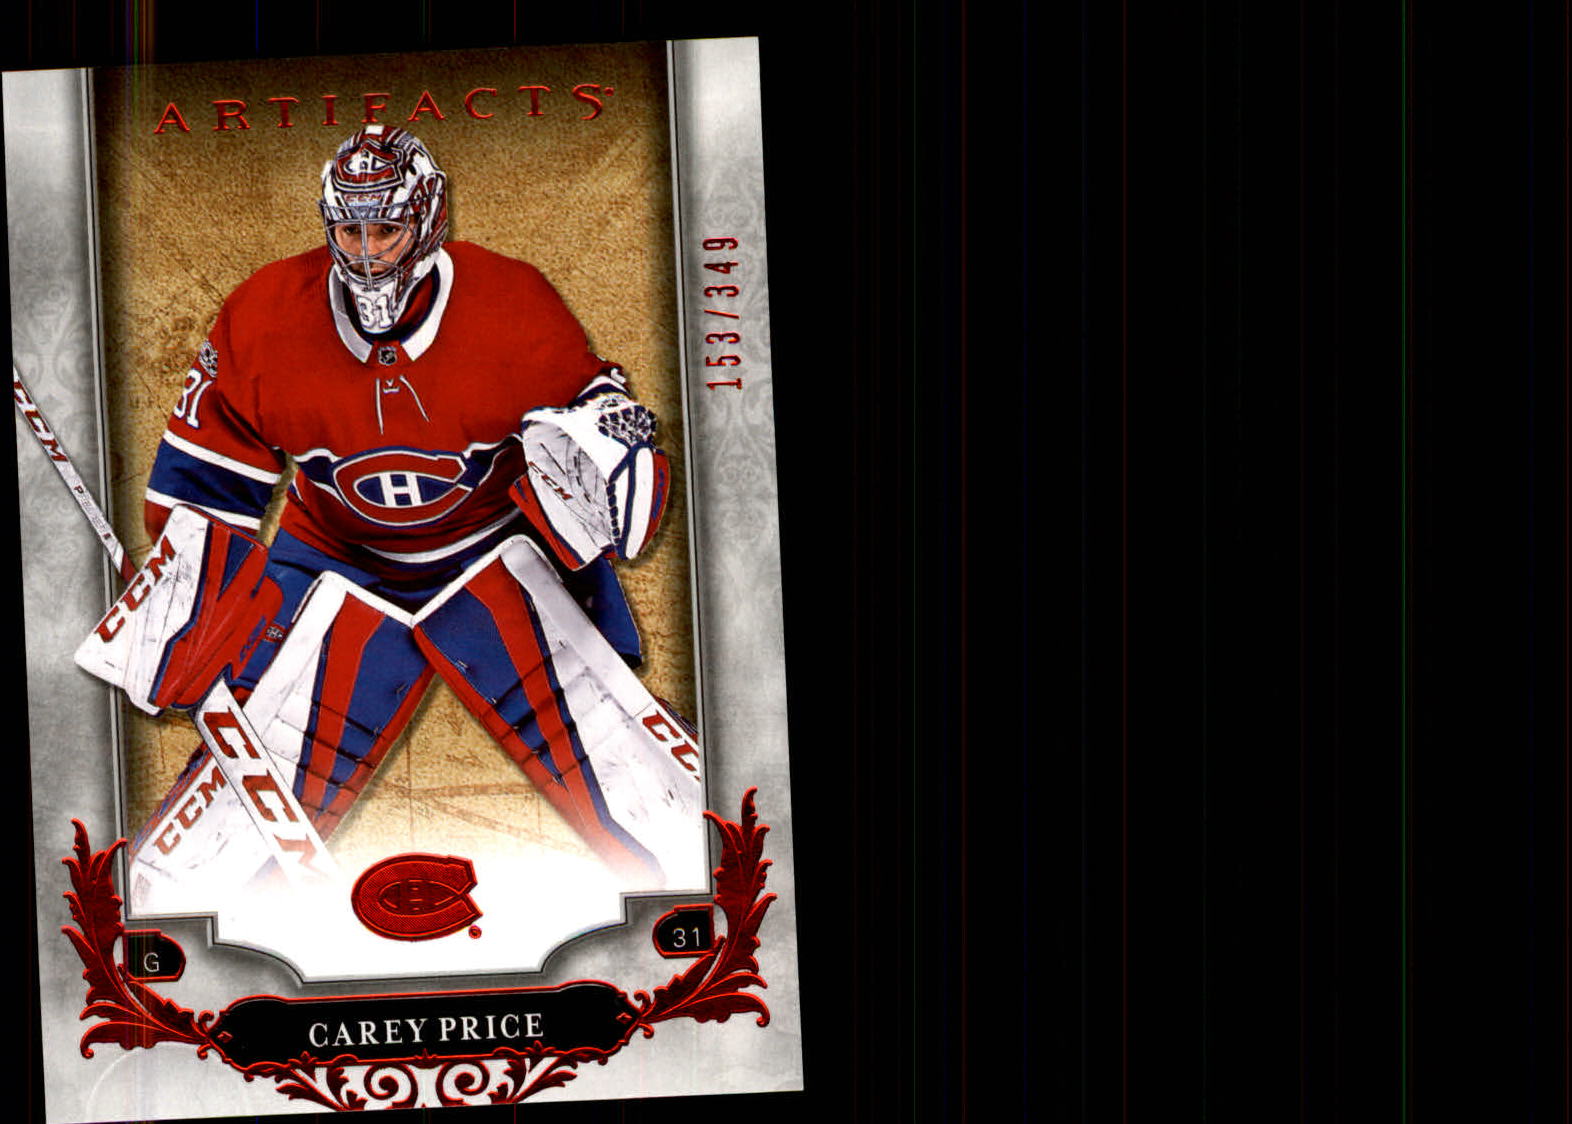 2018-19 Artifacts Ruby #129 Carey Price S